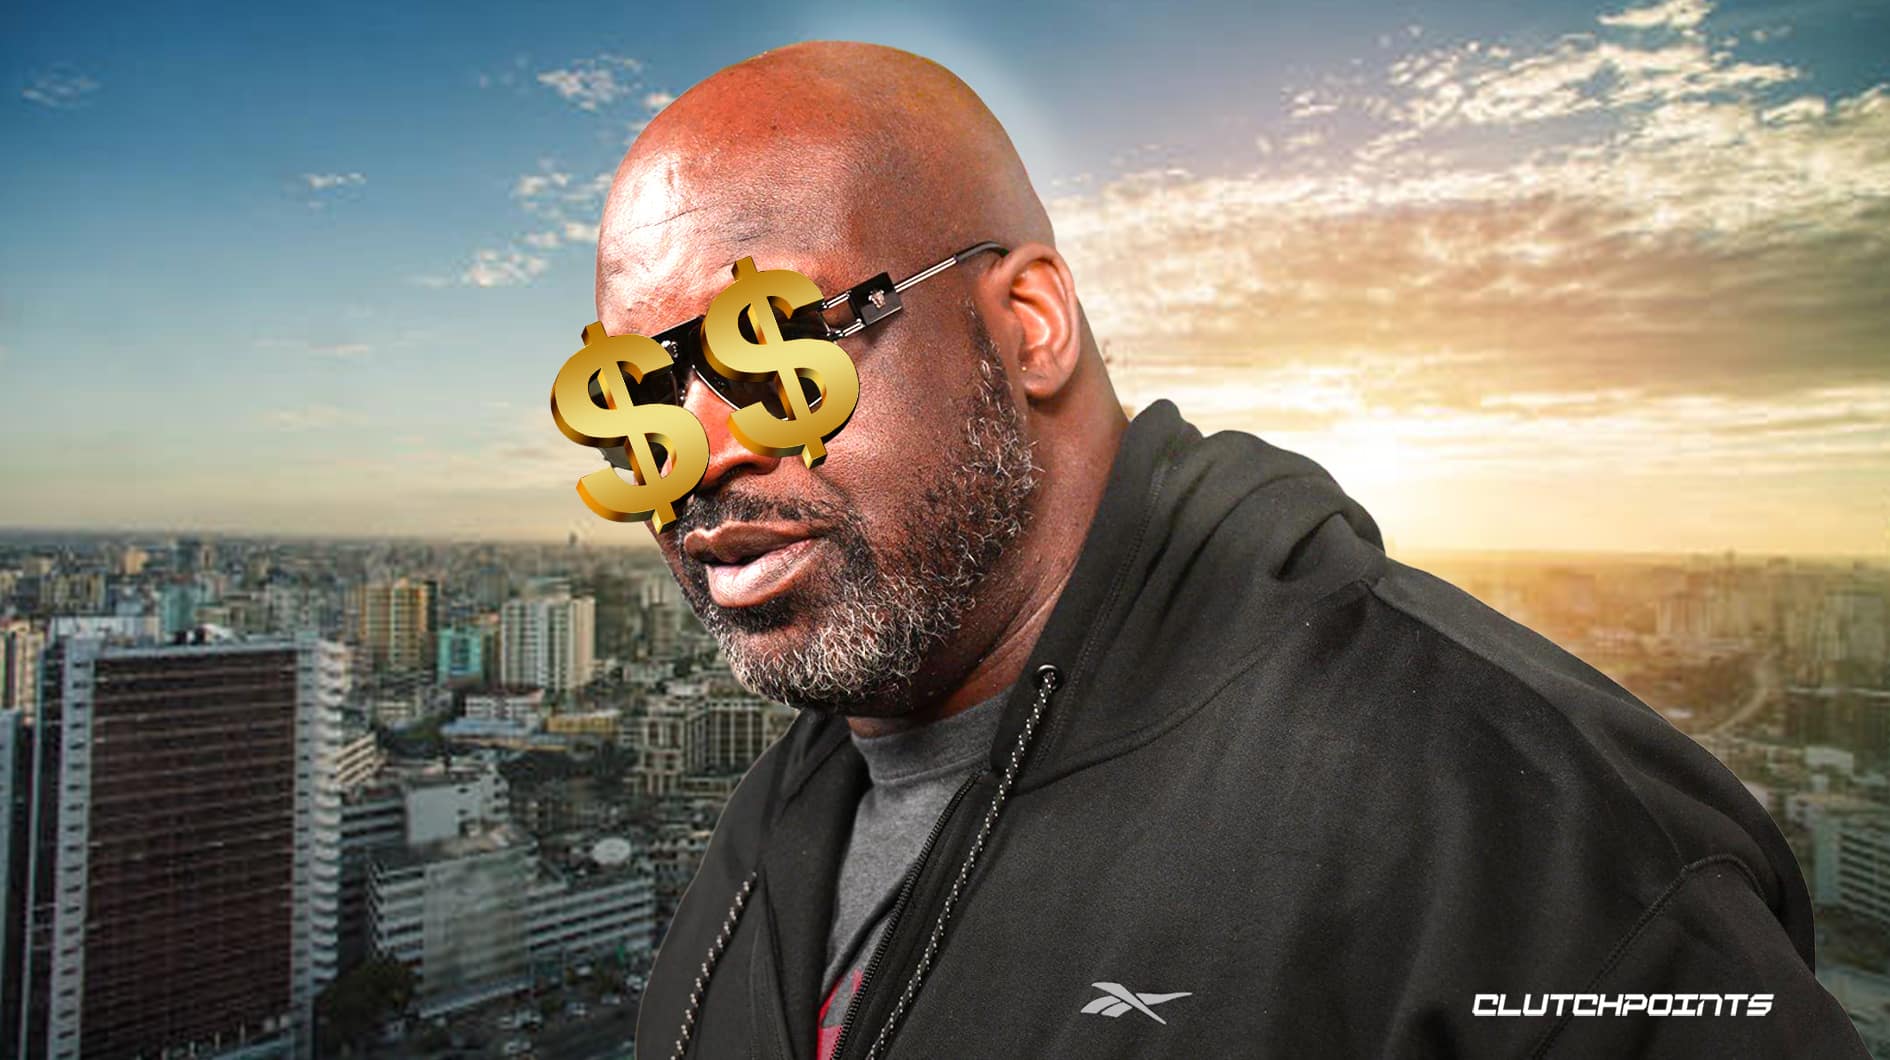 Shaquille O'Neal, Shaquille O'Neal net worth, Shaquille O'Neal's net worth in 2023